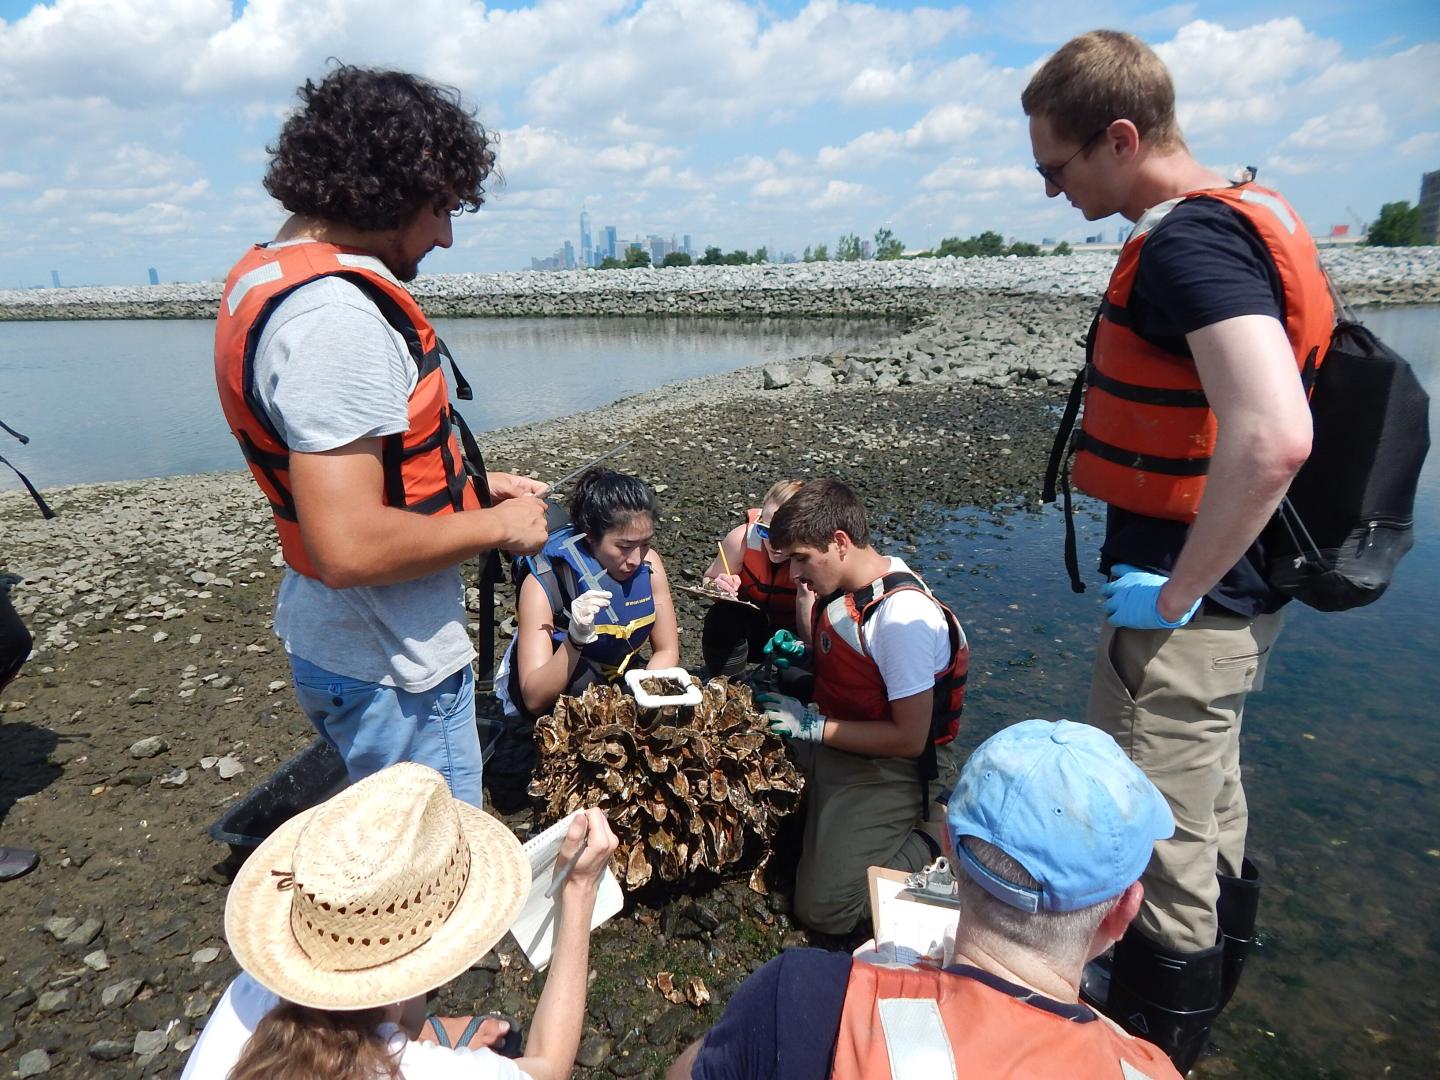 Billion Oyster Project utilizes the harbor as its classroom